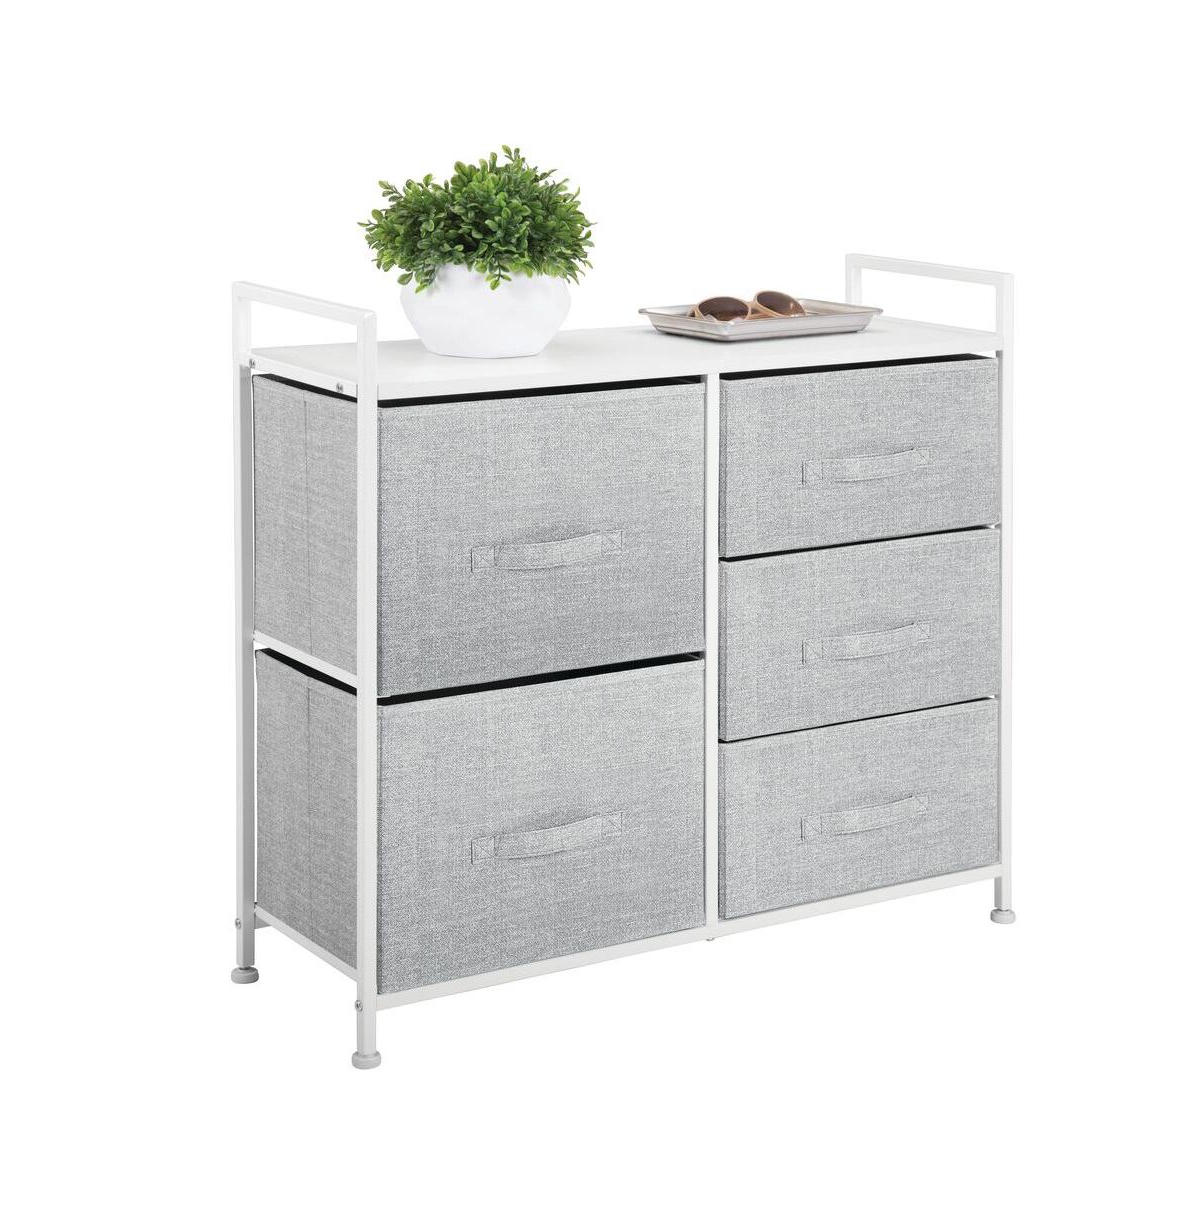 Storage Dresser Furniture, 5 Removable Fabric Drawers - Gray